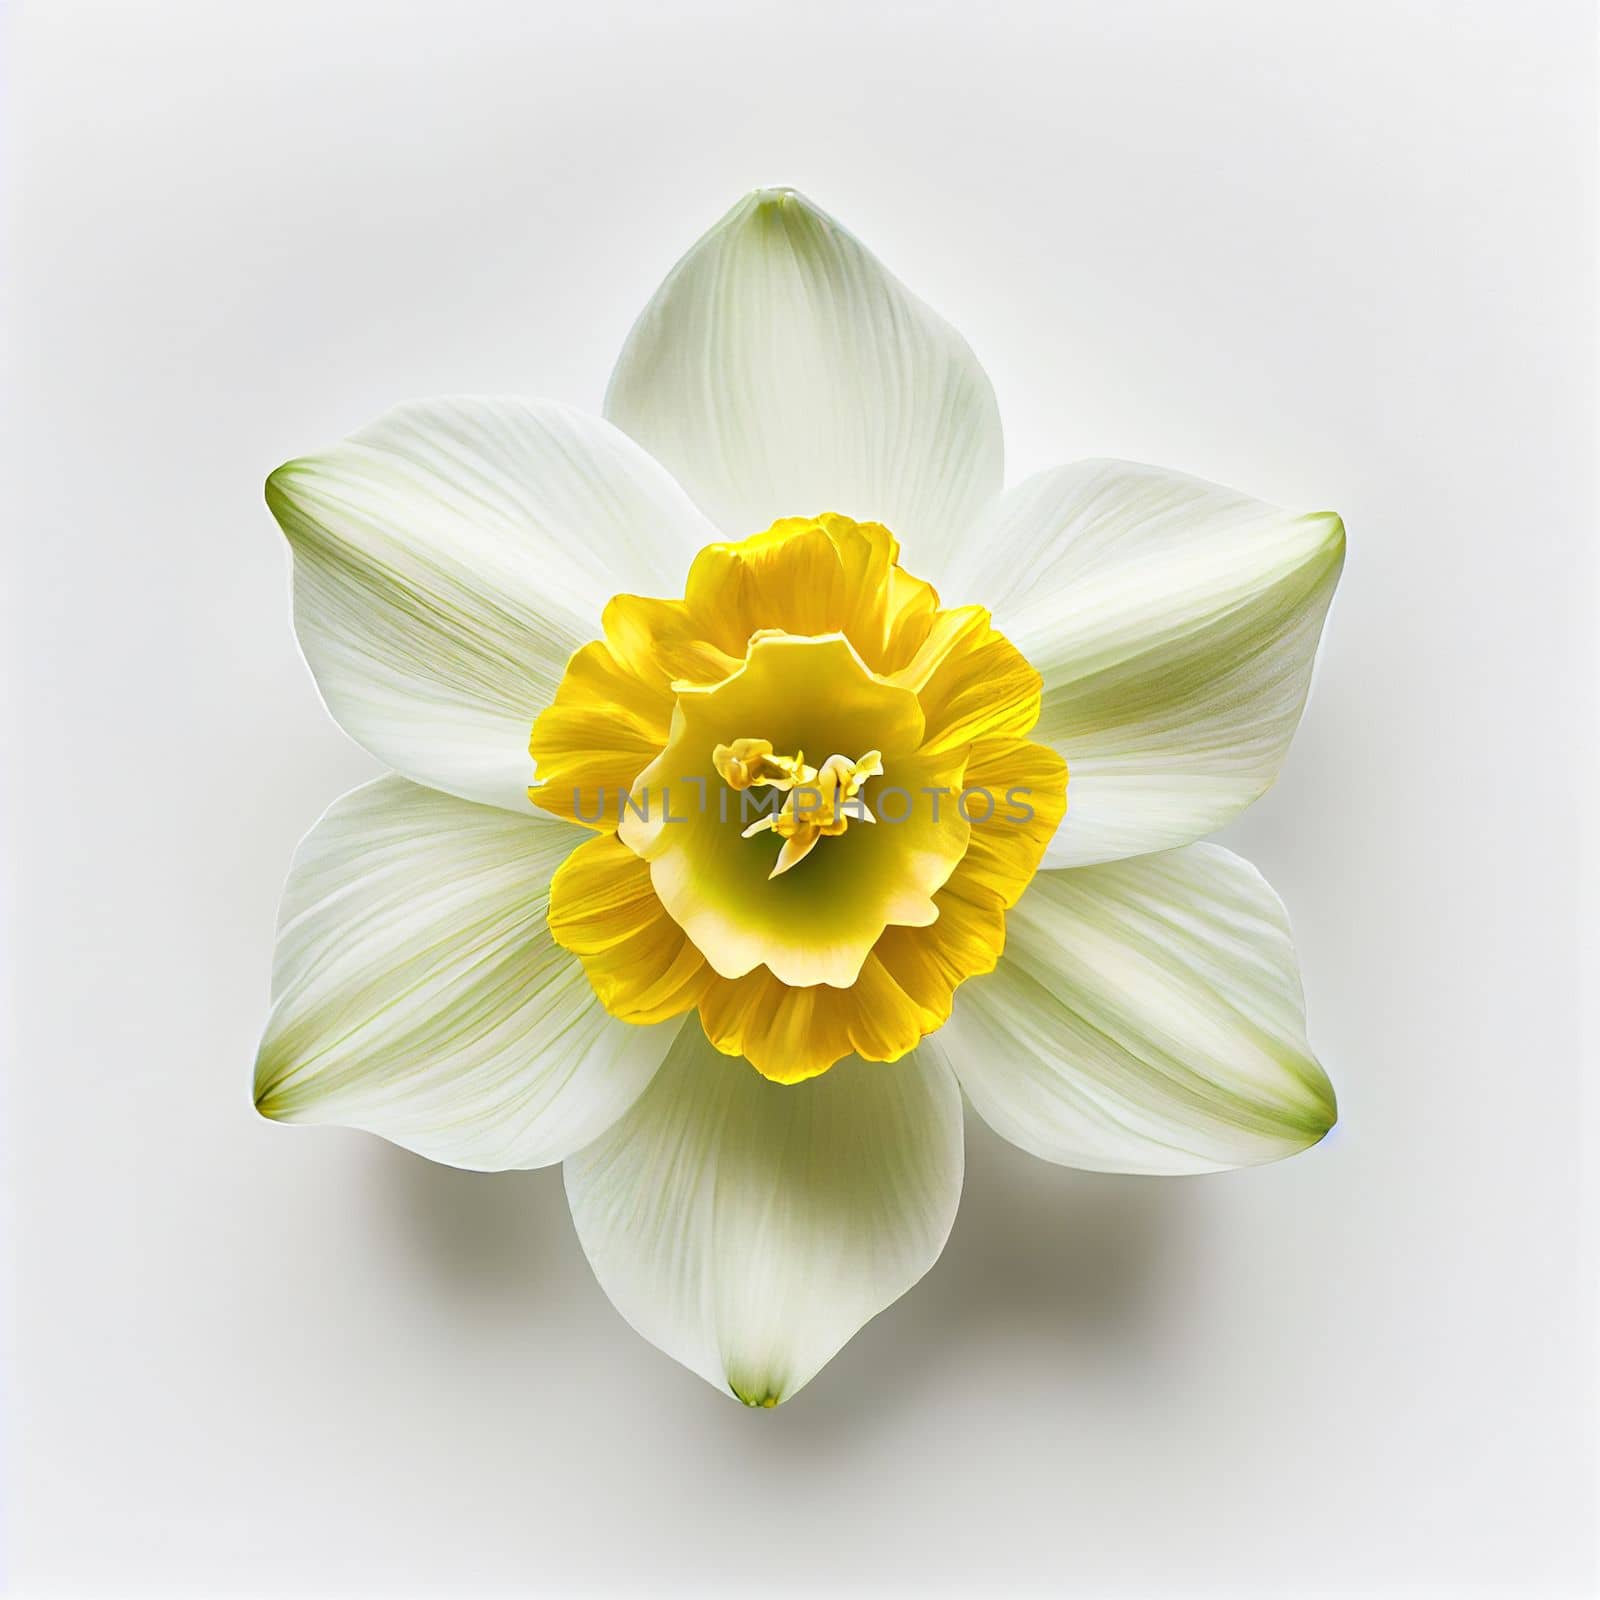 Top view of Daffodils flower on a white background, perfect for representing the theme of Valentine's Day.